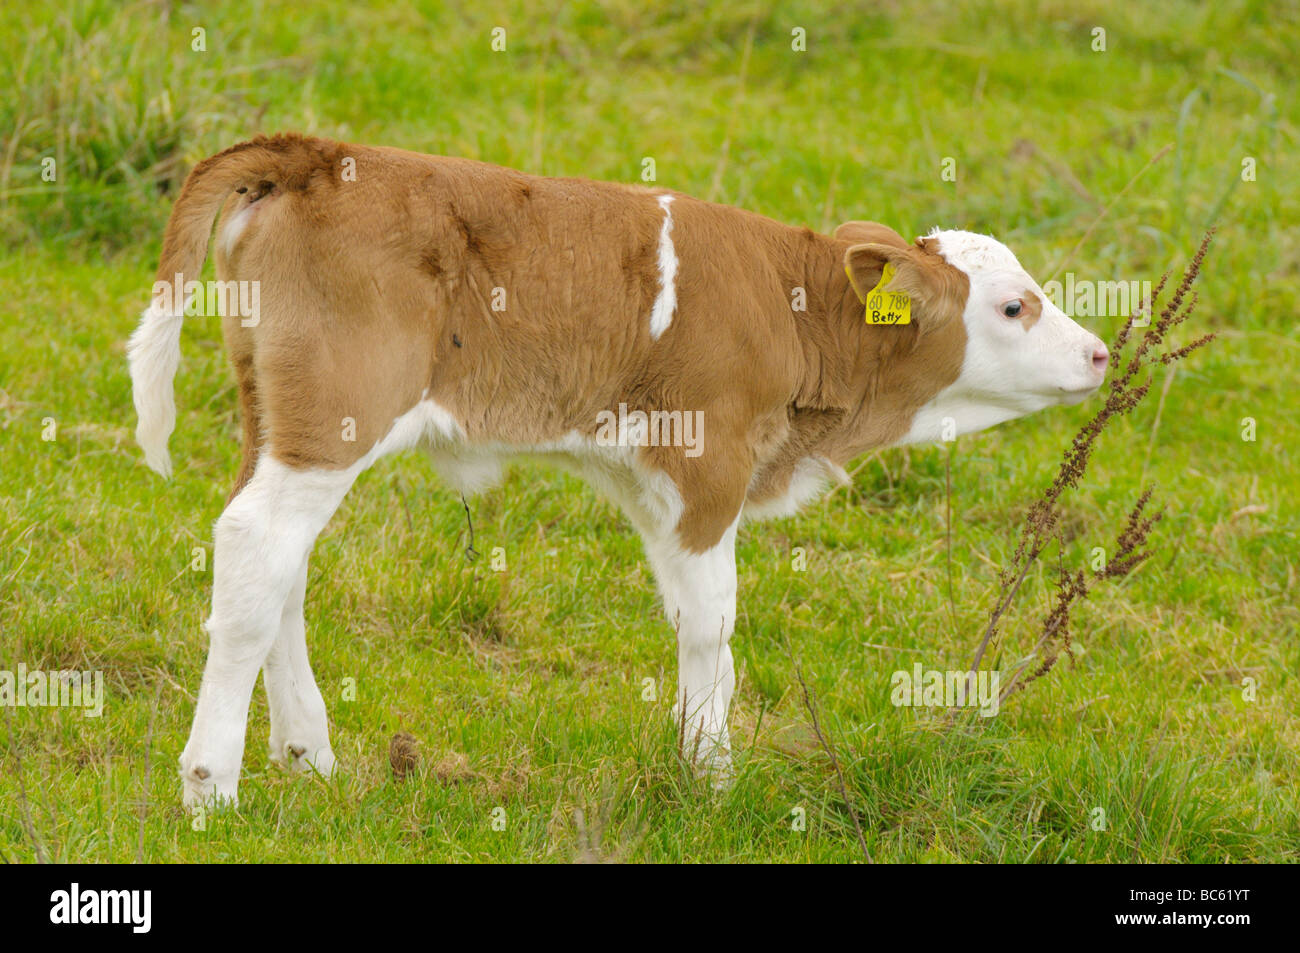 Cow's calf standing in field, Franconia, Bavaria, Germany Stock Photo